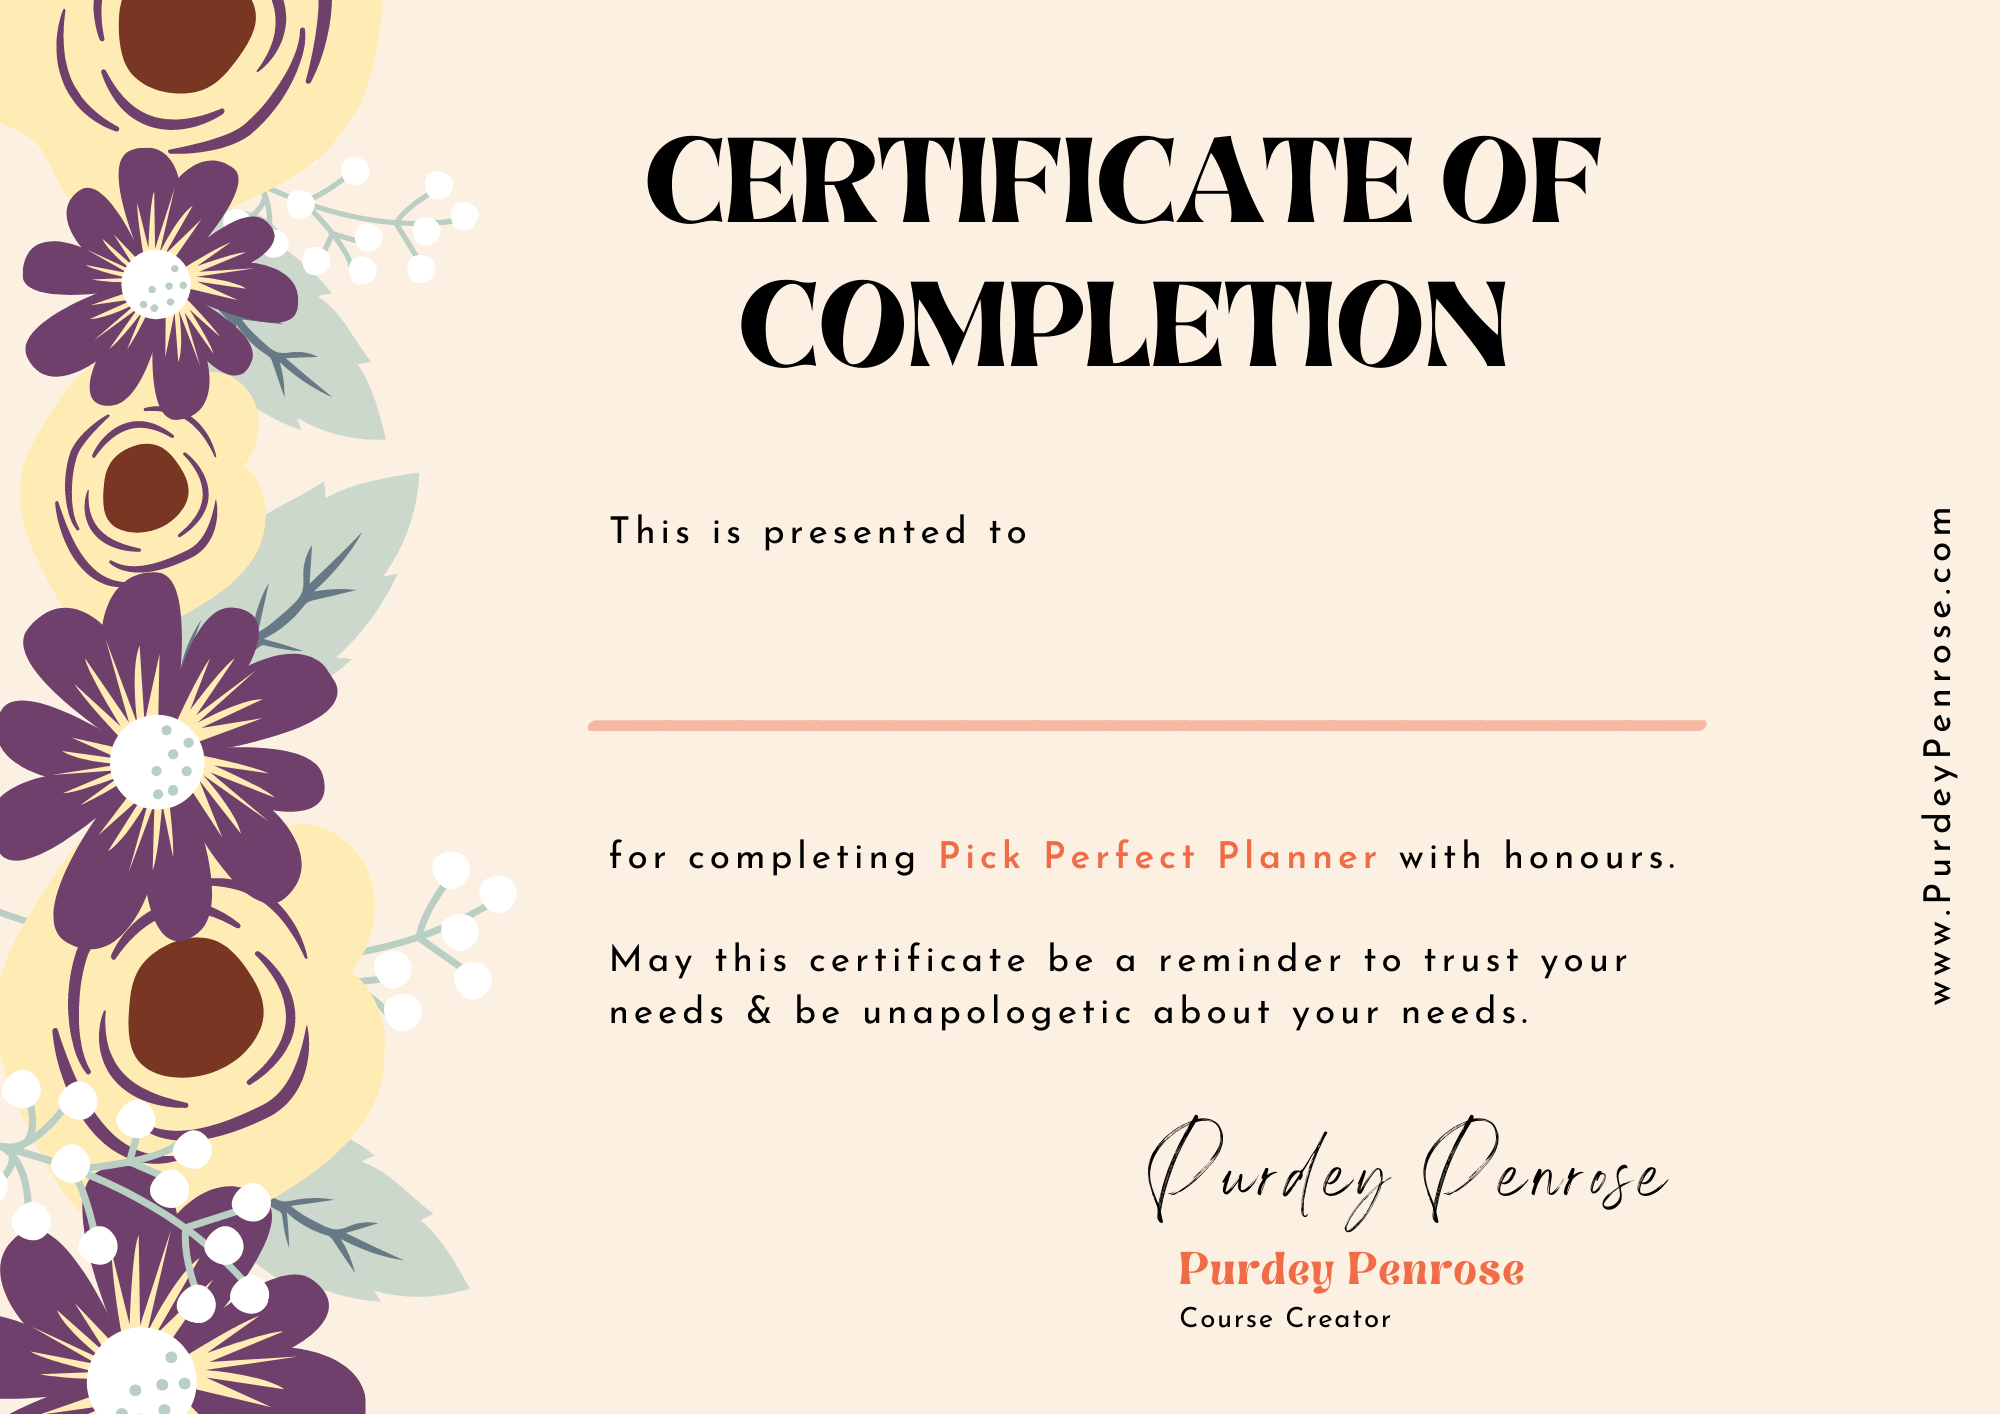 certificate of completion_Pick_Perfect_Planner_Purdey_Penrose.pdf